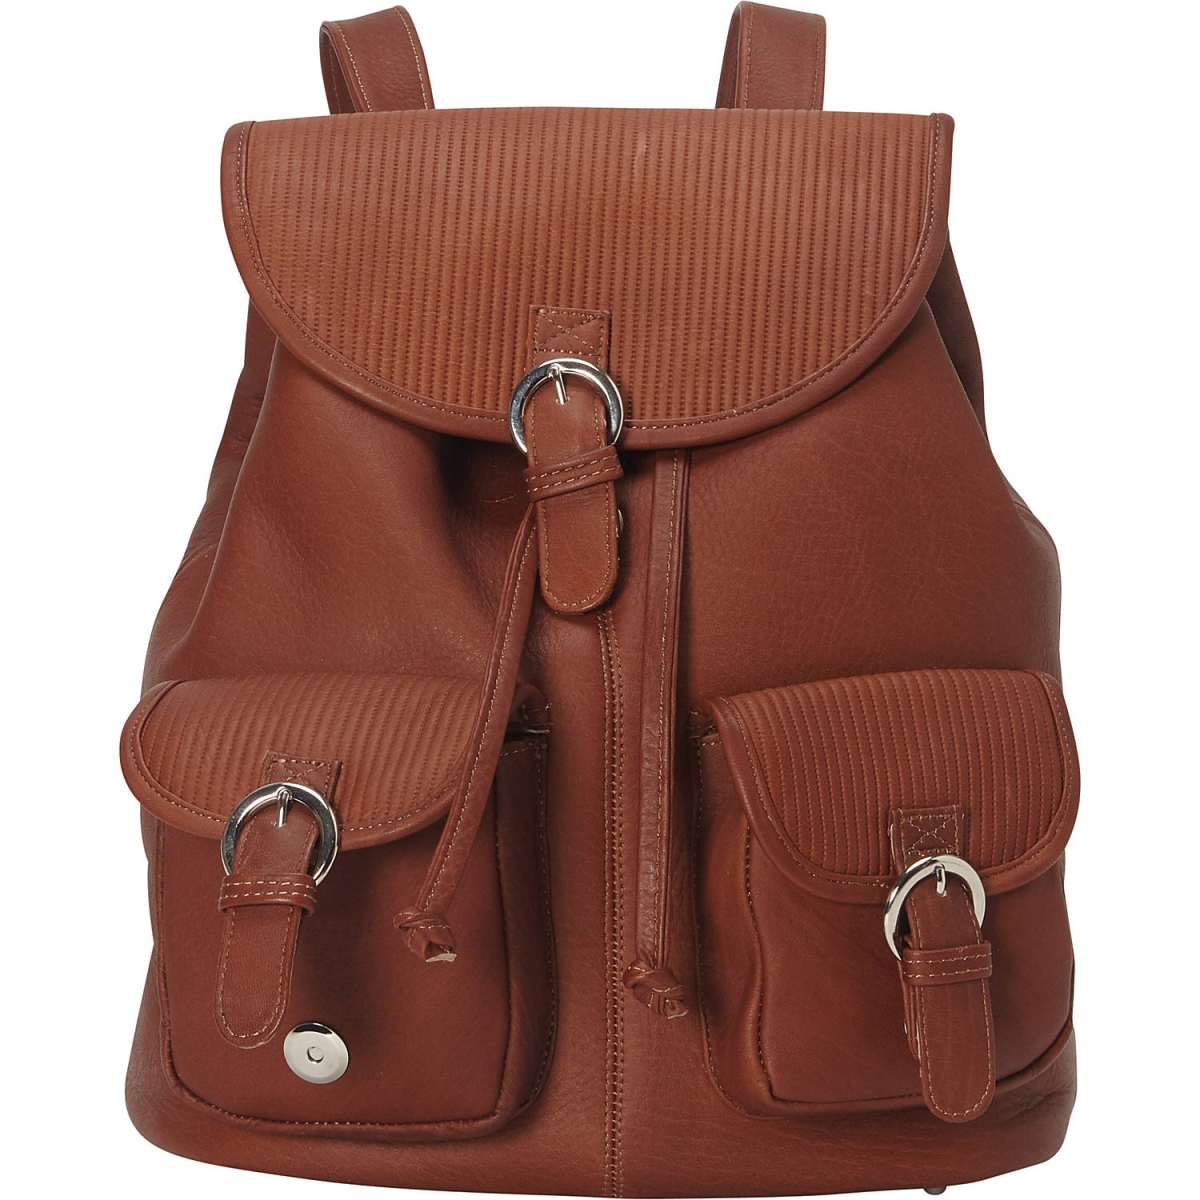 Piel Leather 3156 Piel Leather 3156 Small Two-Pocket Backpack